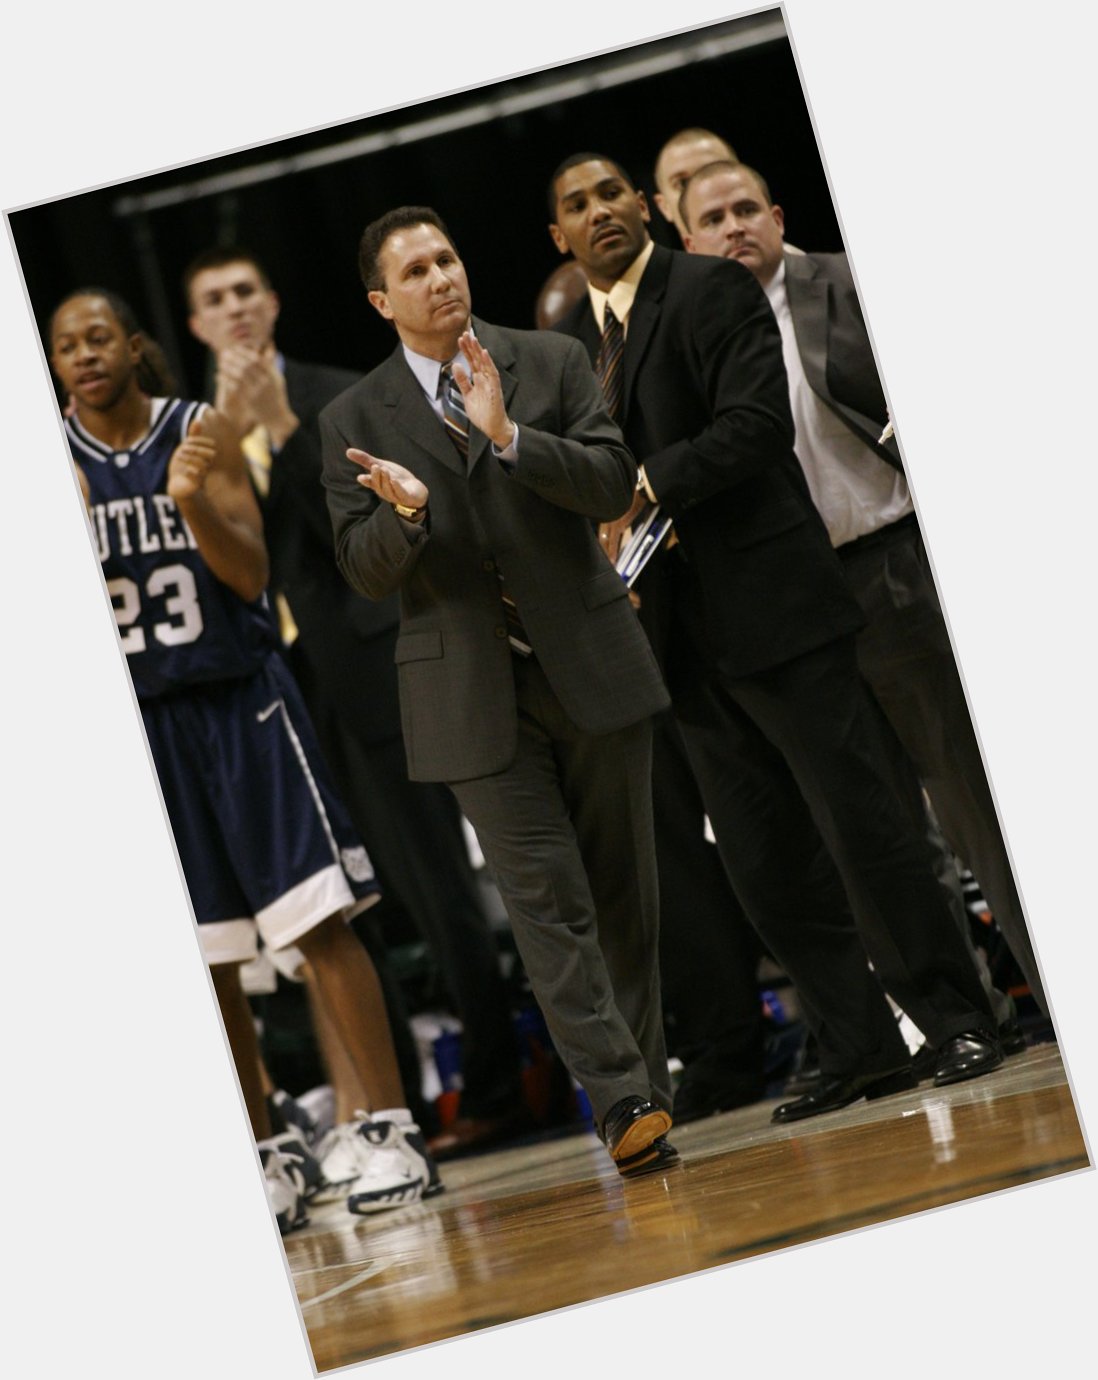 Happy Birthday to Butler alum and former Bulldogs coach Todd Lickliter! 